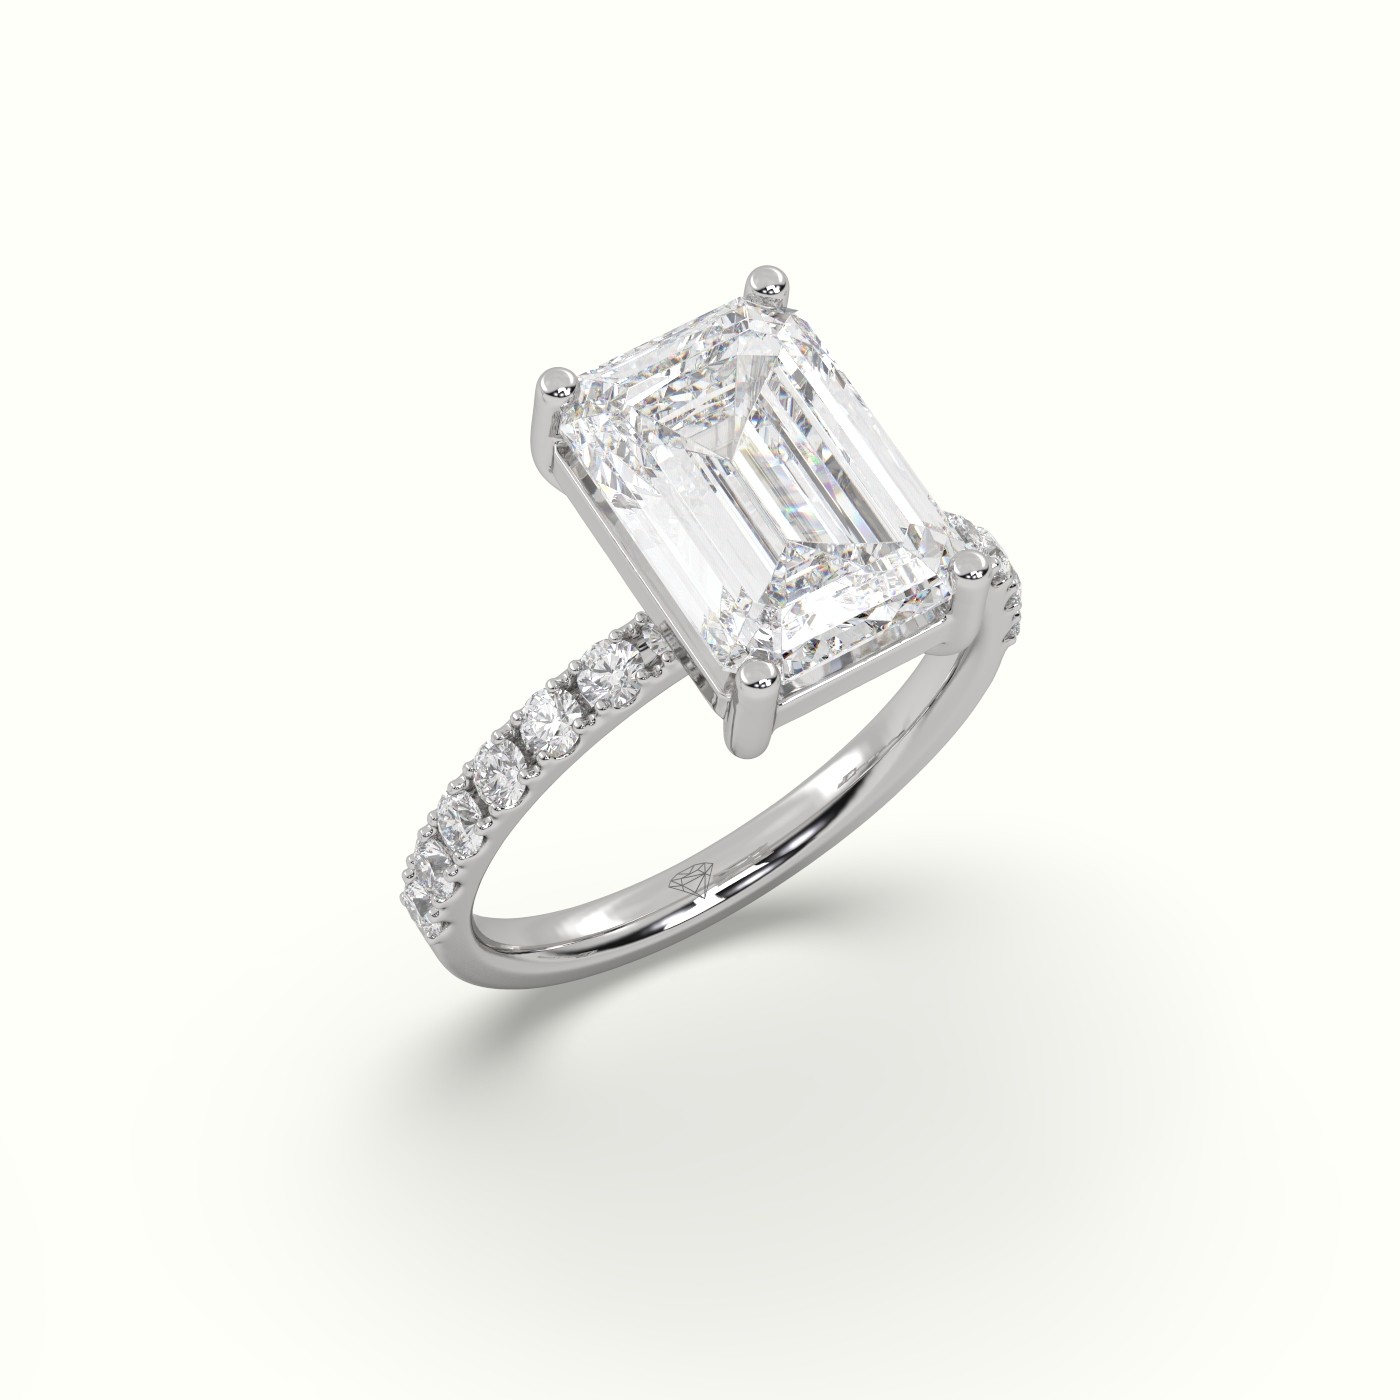 18K WHITE GOLD Emerald Cut Diamond Engagement Ring with Pave Band